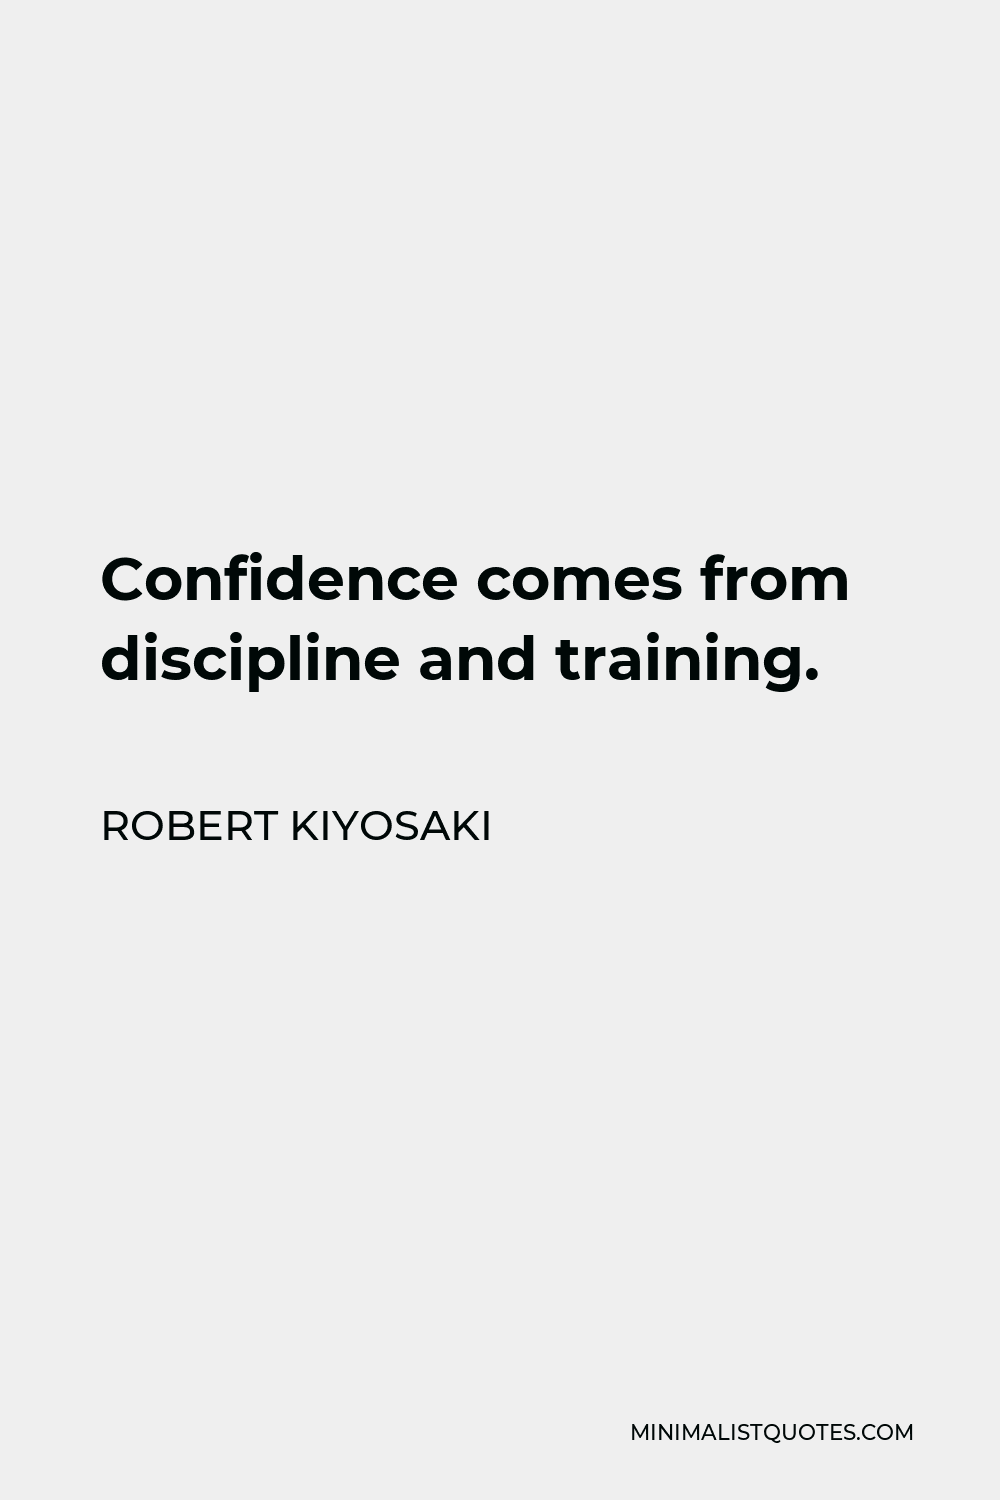 Robert Kiyosaki Quote - Confidence comes from discipline and training.